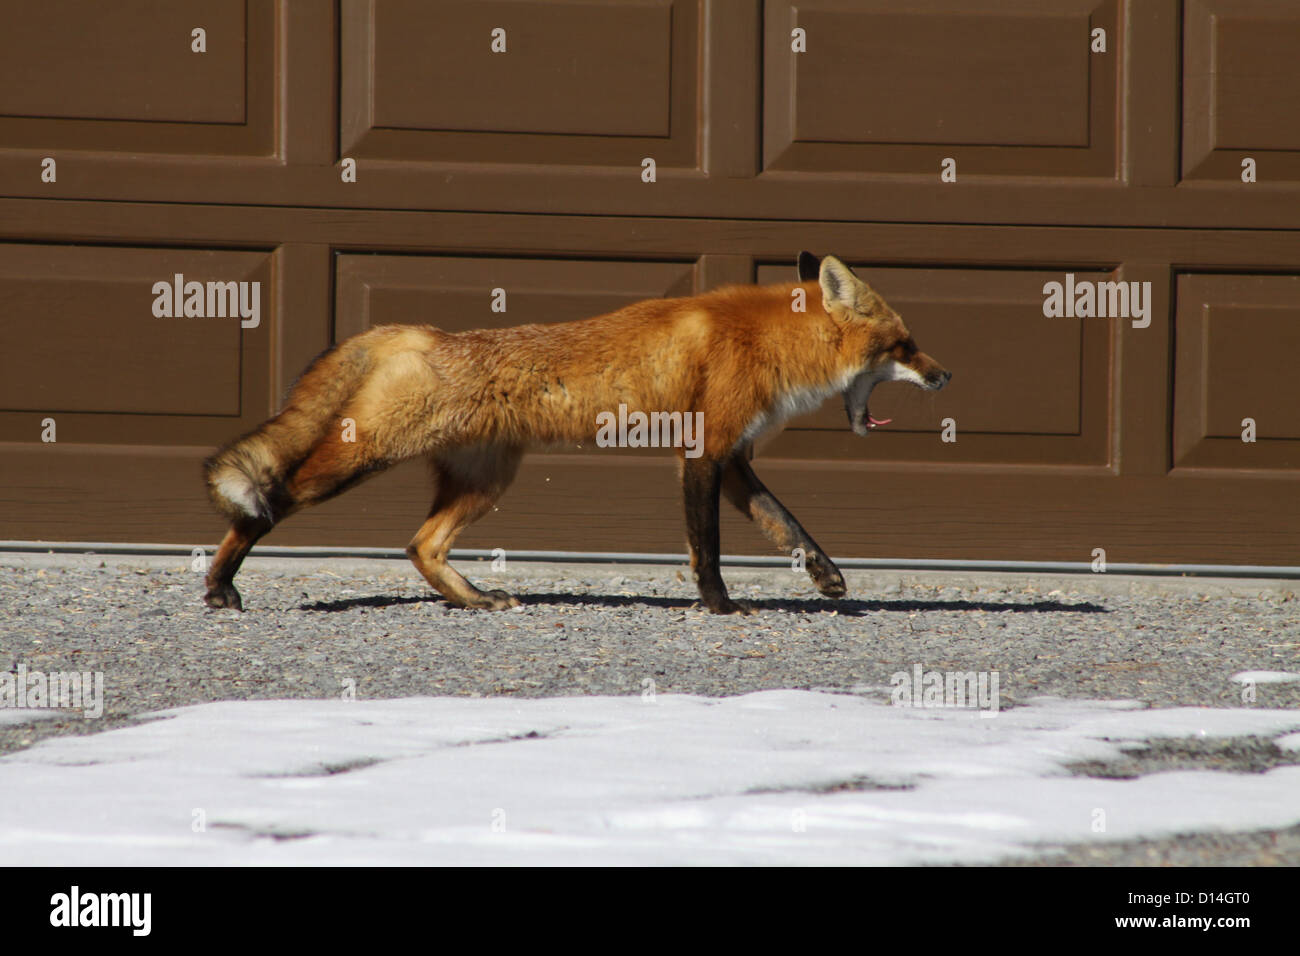 Wild, Red Fox walking across a partially snow covered driveway of a house in the suburbs of a small city, yawning. Stock Photo